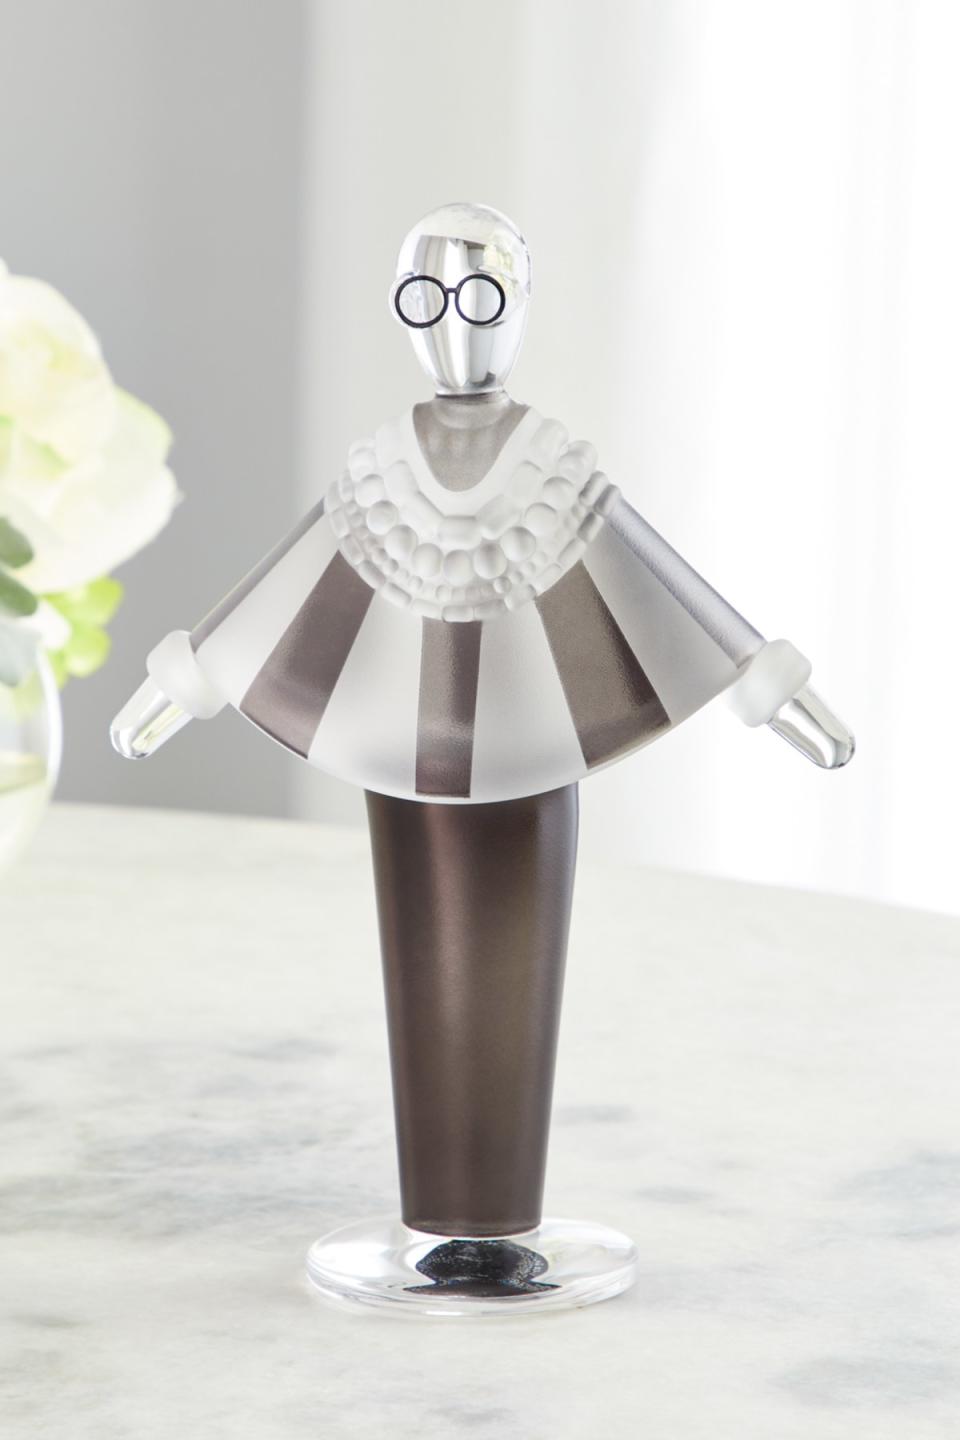 A figure of Apfel from her new Nude Glass Neiman Marcus collection.